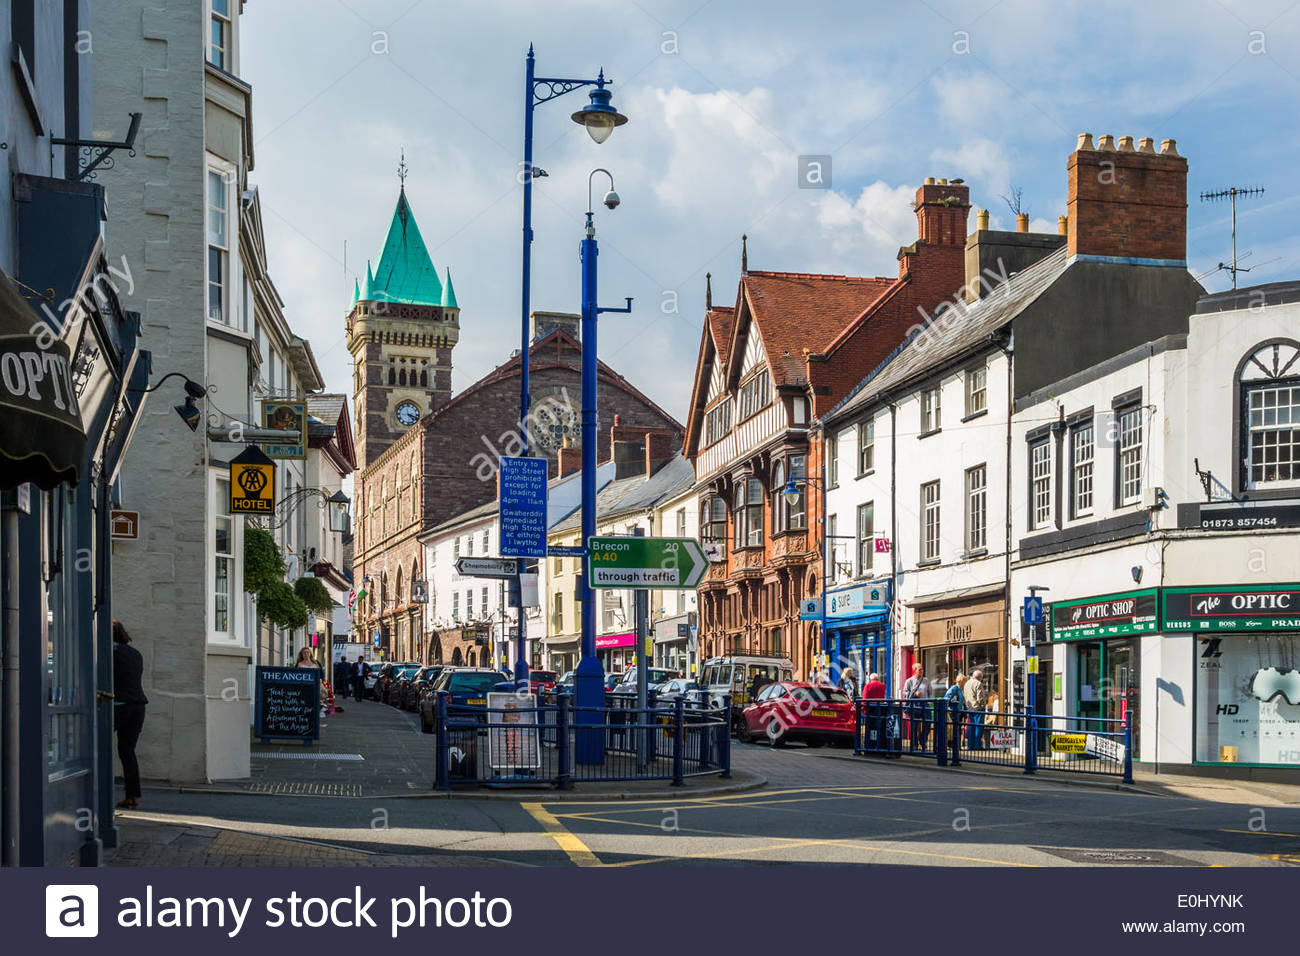 town-centre-street-scene-in-abergavenny-monmouthshire-wales-uk-E0HYNK